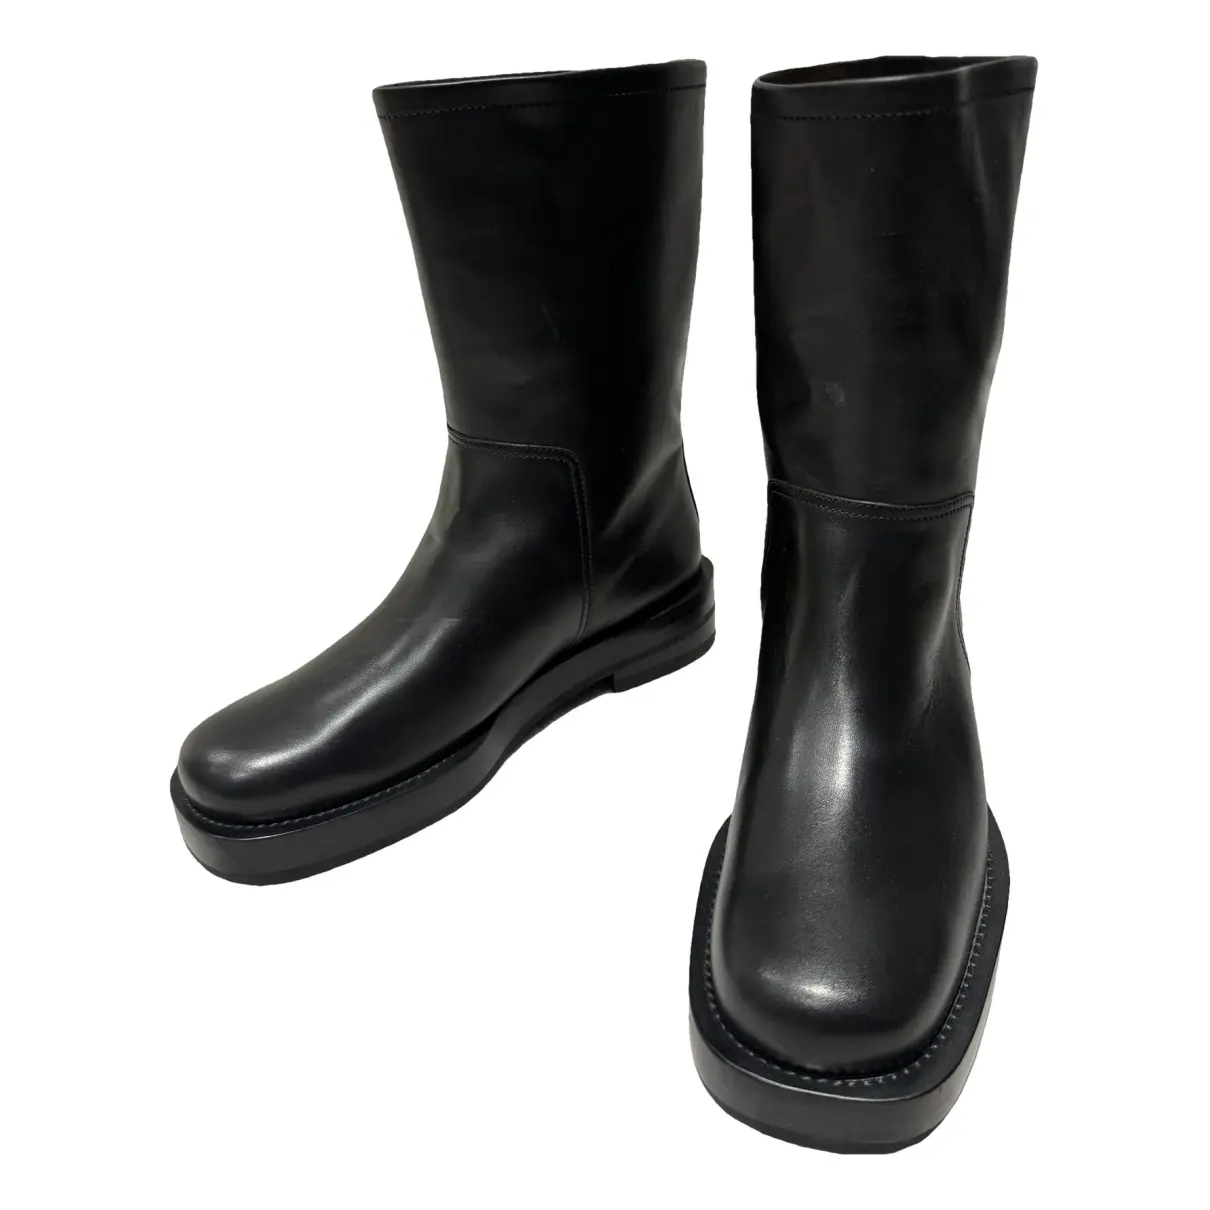 Pony-style calfskin boots